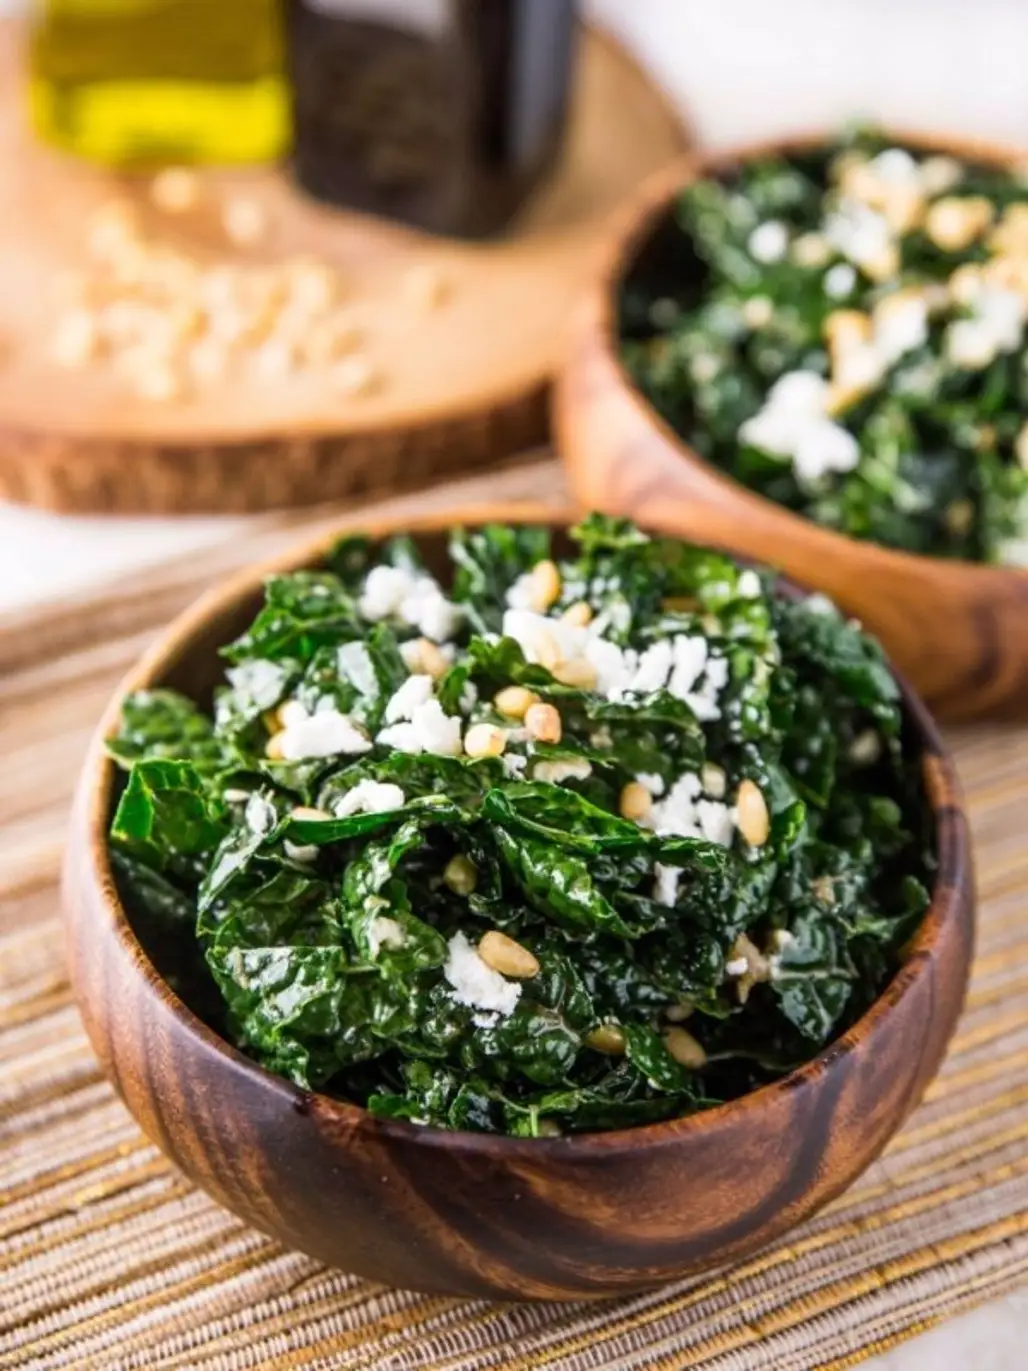 Warm Kale Salad with Goat Cheese, Pine Nuts and Sweet Onion Balsamic Dressing